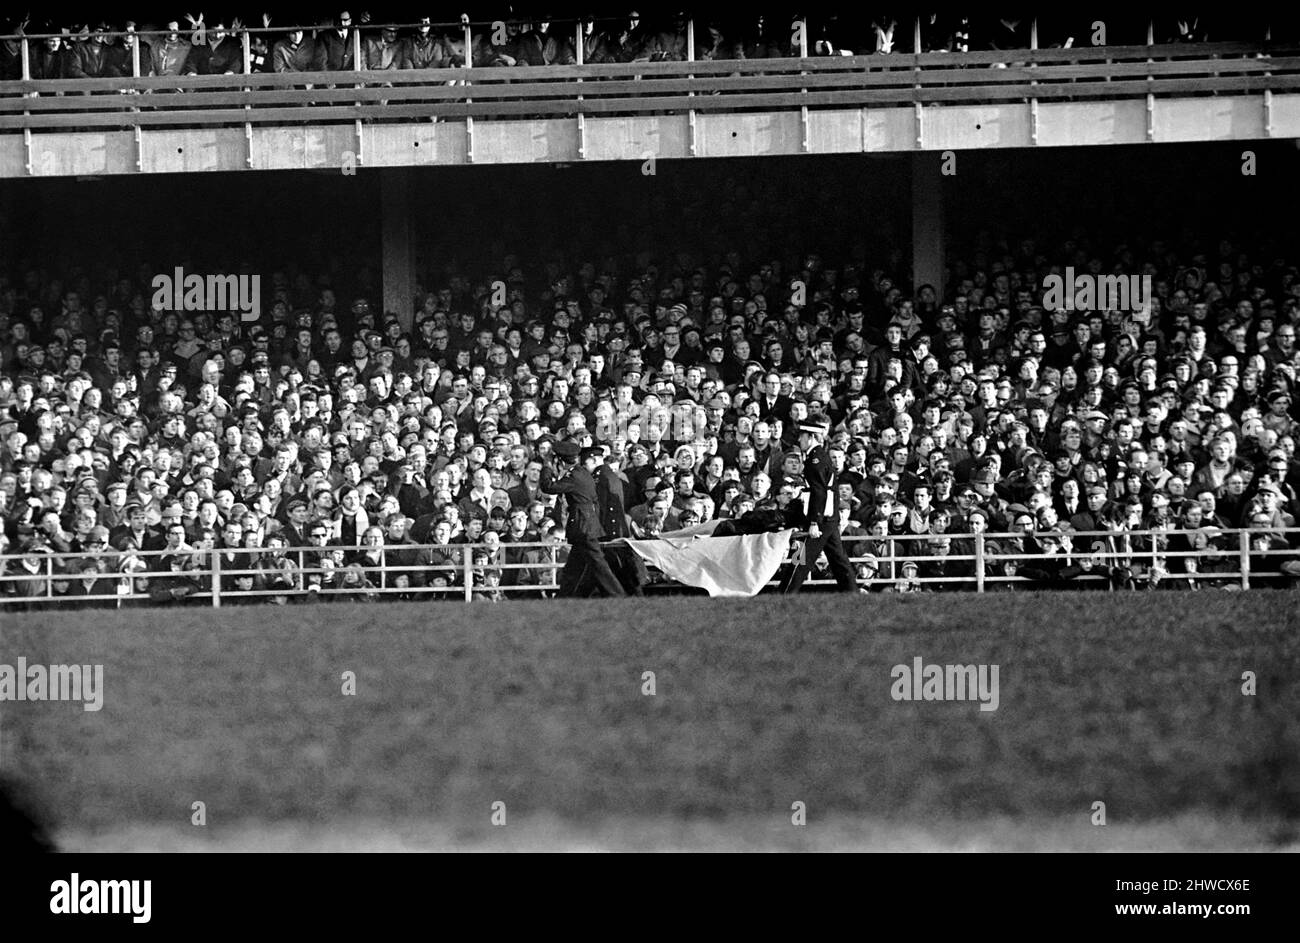 Derby v. Nottingham Forest. Police and St. John mt. men at the trouble spot in the crowed. December 1969 Z11534-014 Stock Photo